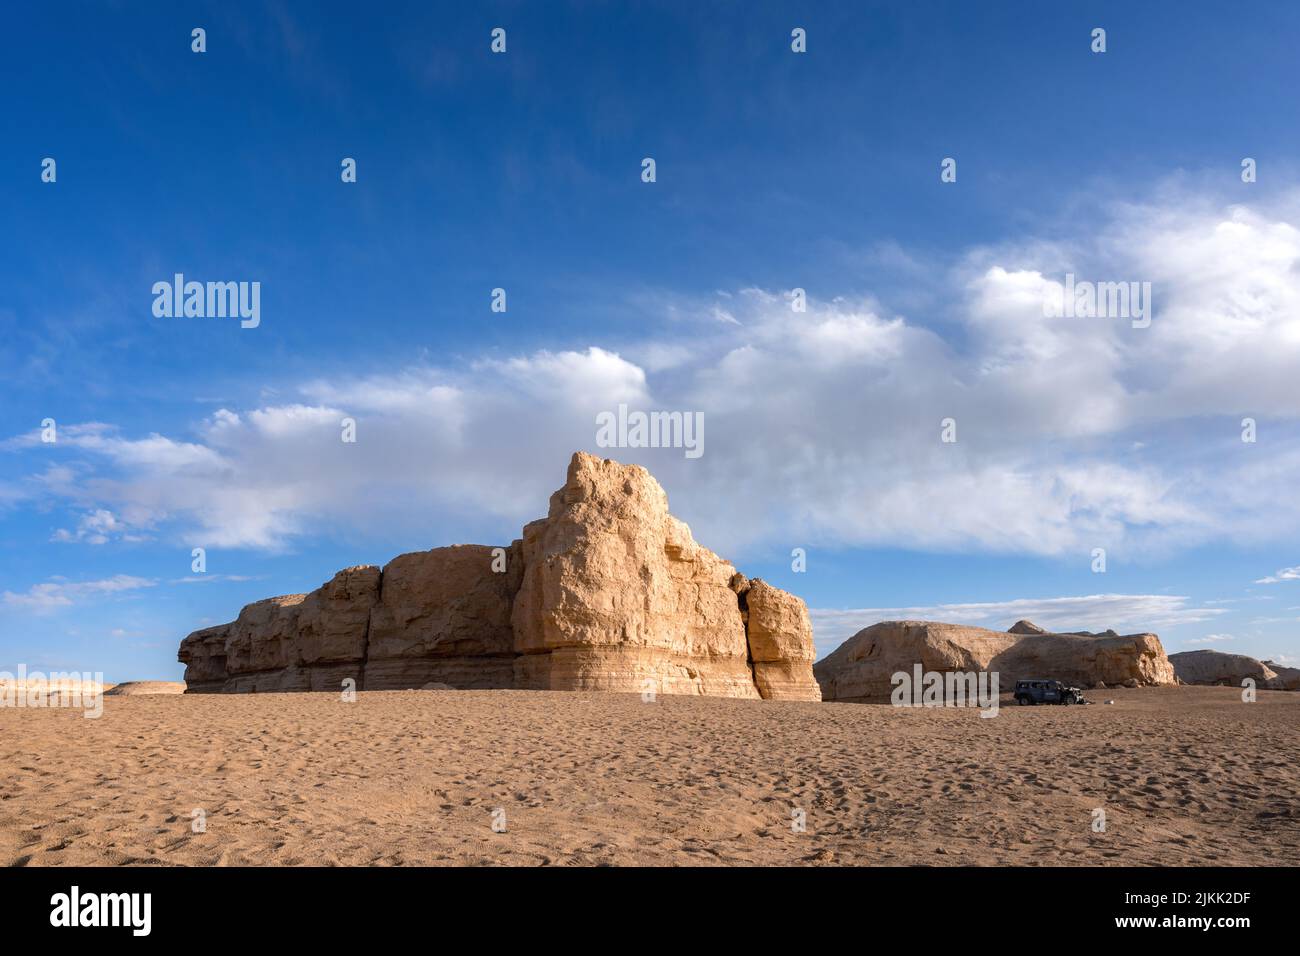 The beautiful view of the sandstones in the desert against the blue sky. Stock Photo